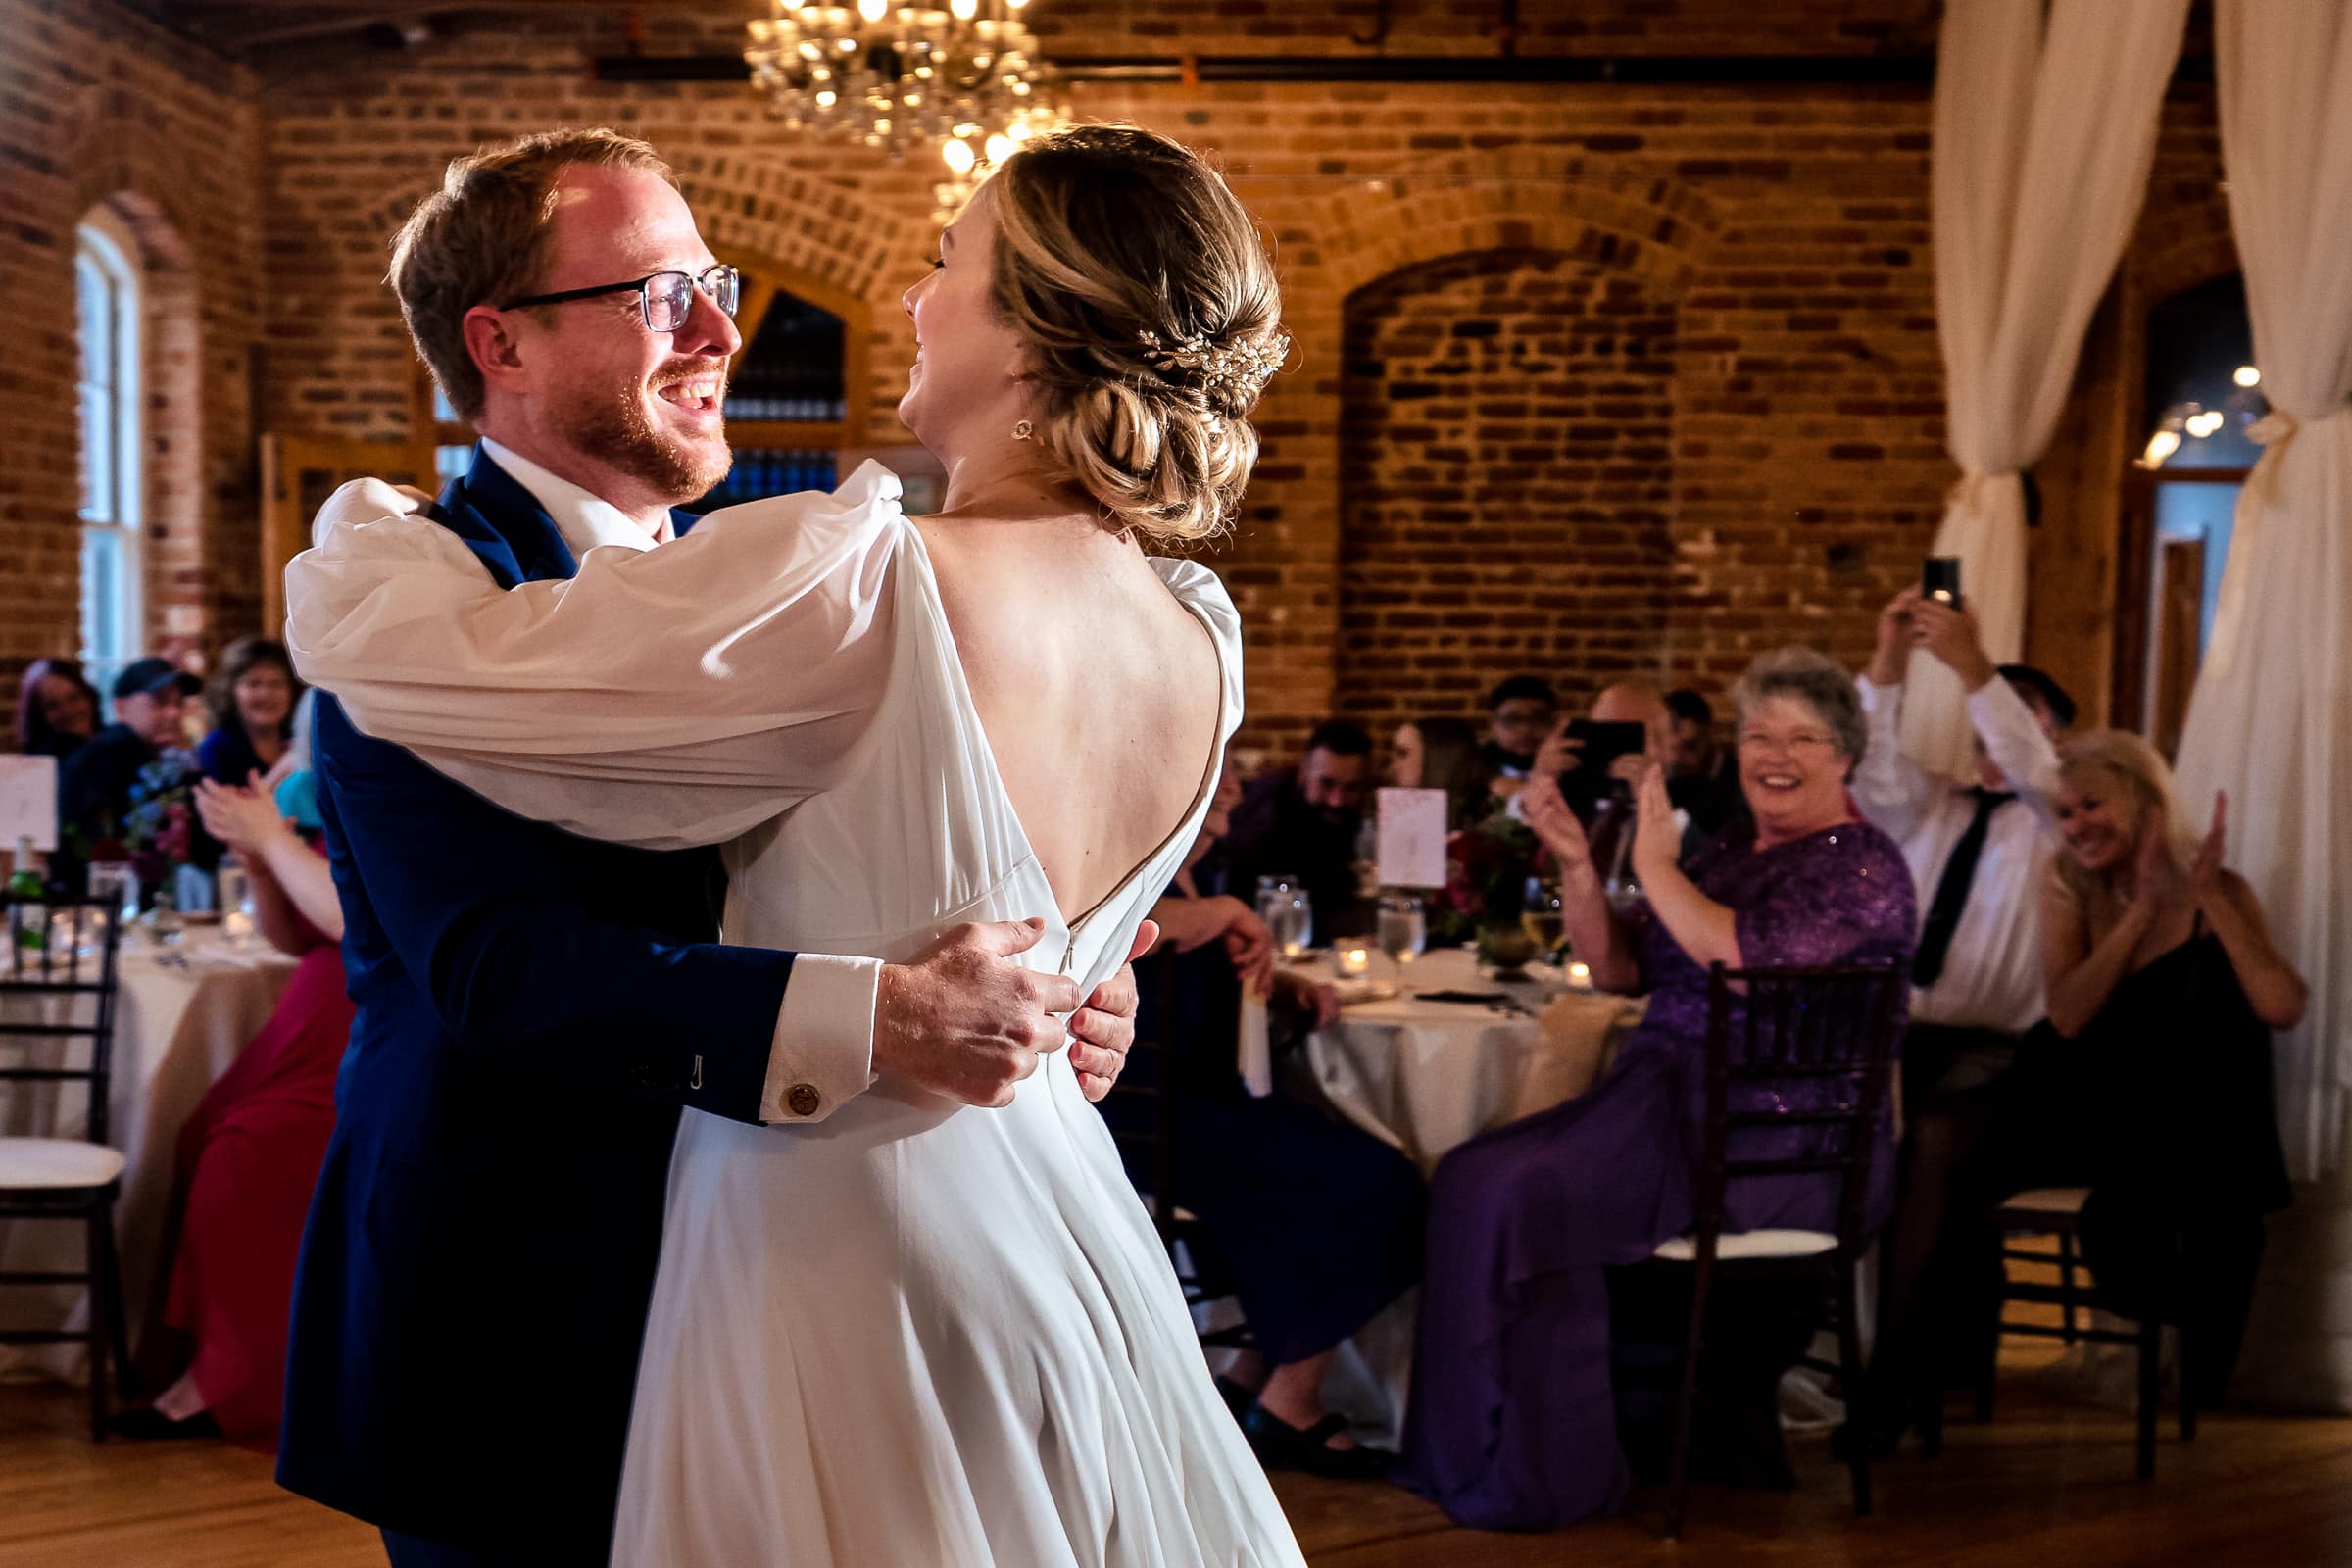 Couple's first dance at Melrose Knitting Mill | photos by Kivus & Camera